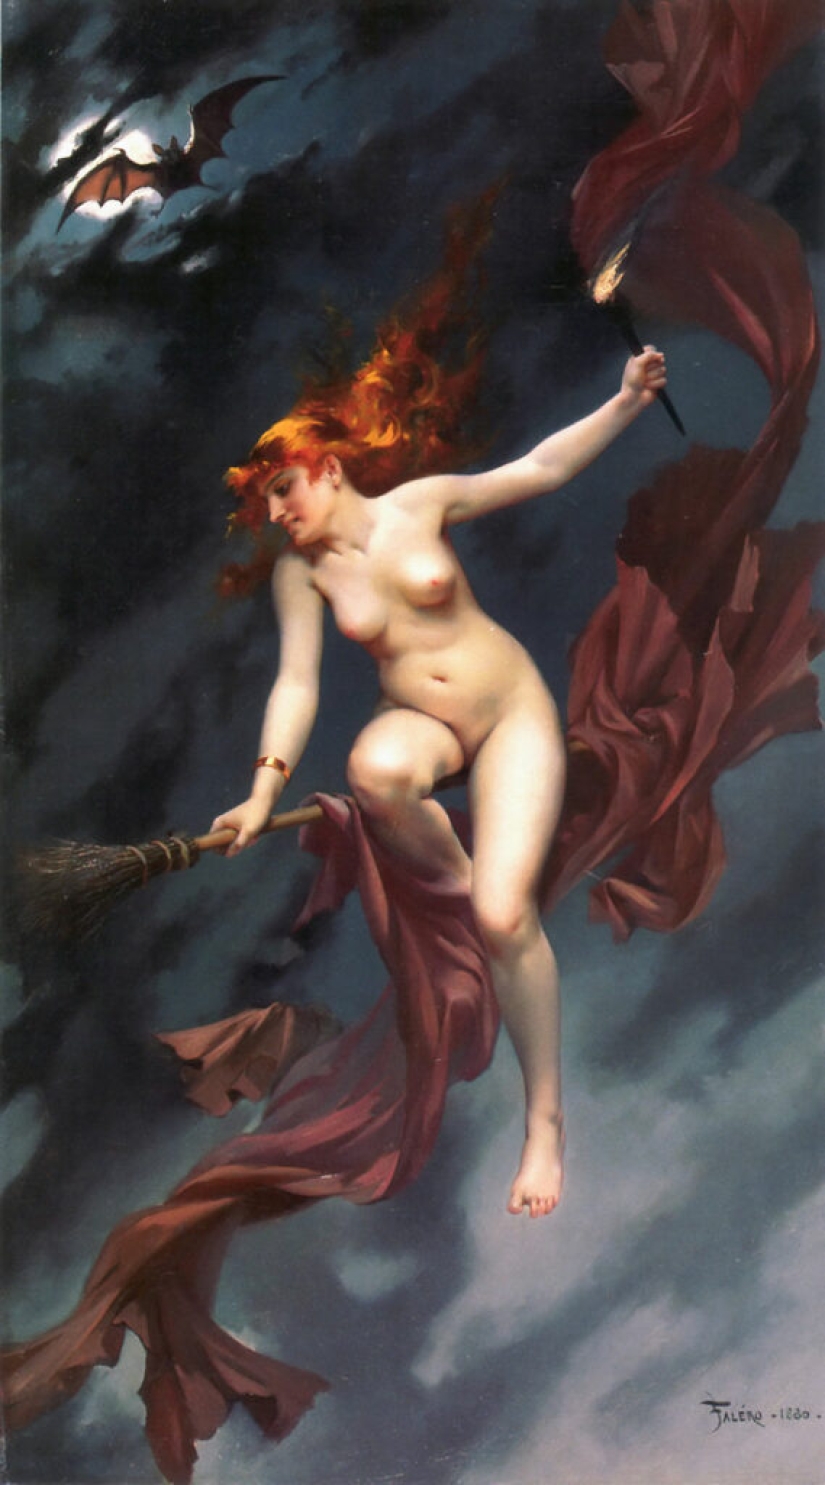 Nude fairies by the artist Luis Ricardo Falero, who founded the fantasy style in painting